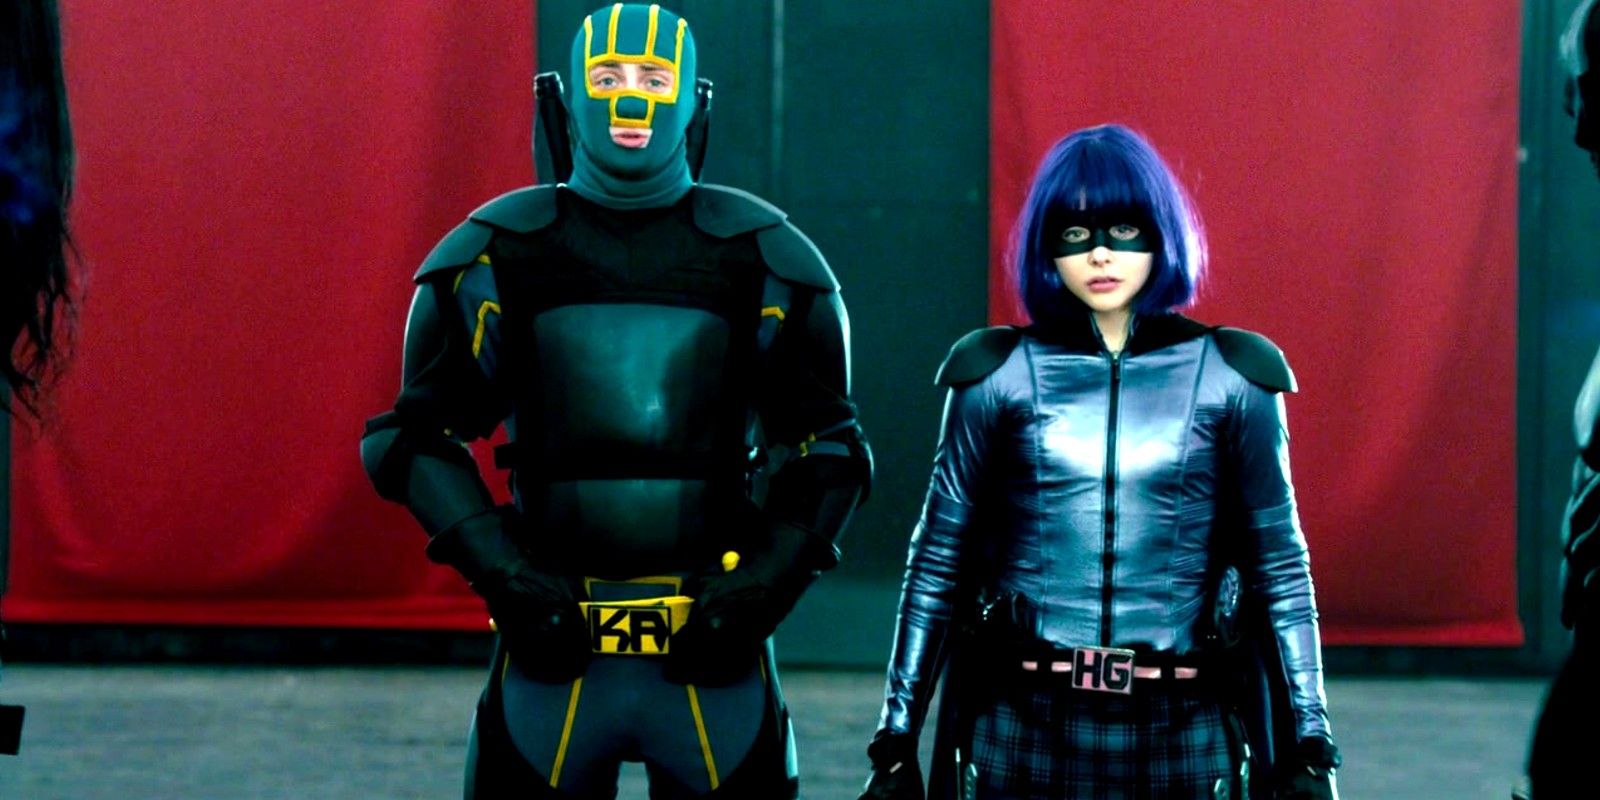 kick-ass-2-director-reflects-on-“challenging”-production-of-matthew-vaughn-sequel